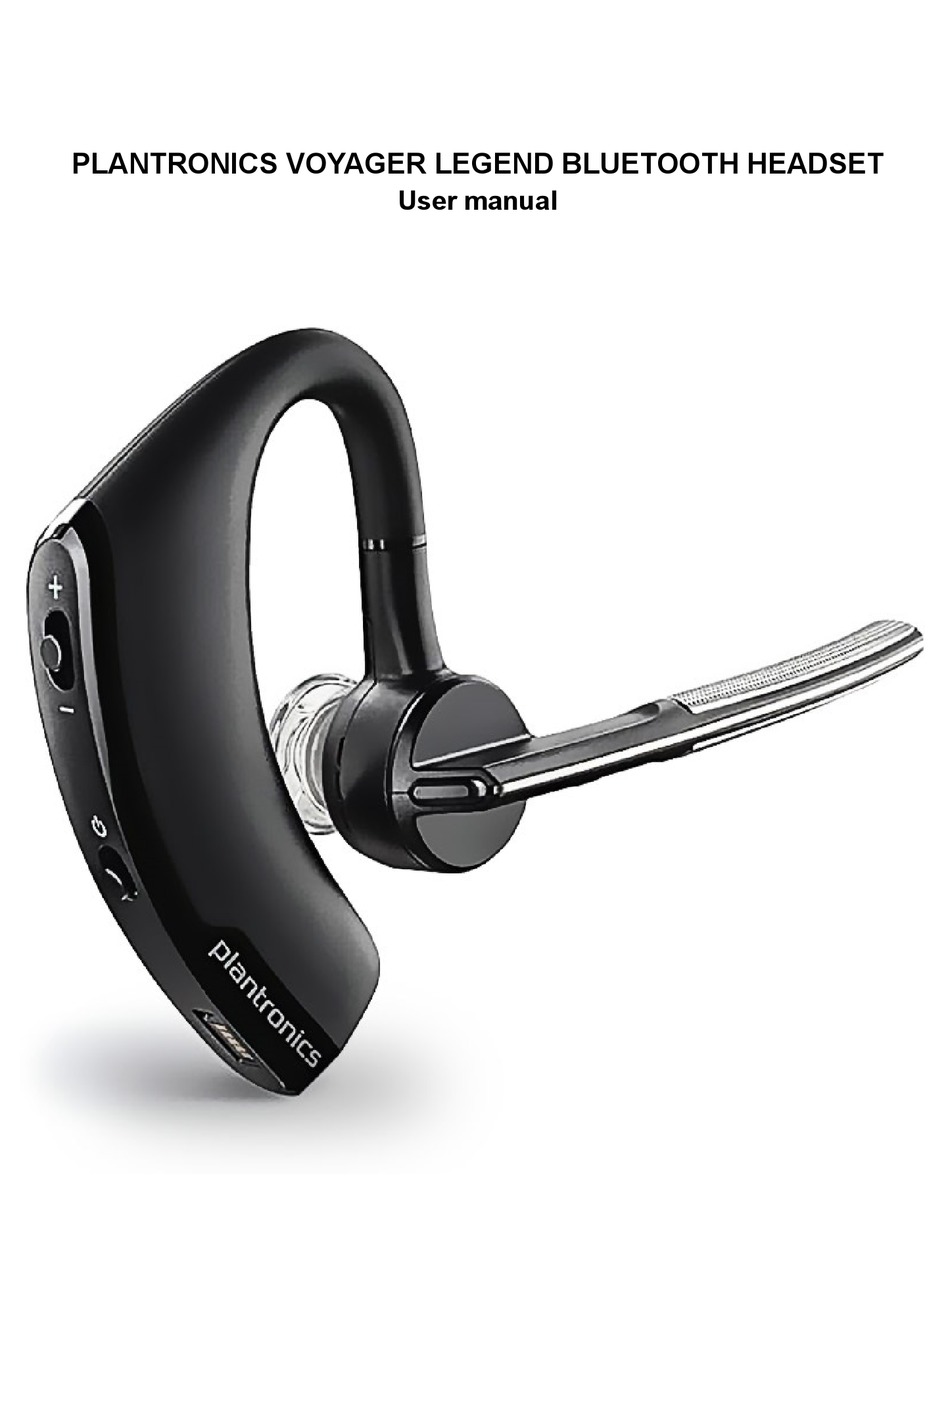 plantronics voyager legend not connecting to pc